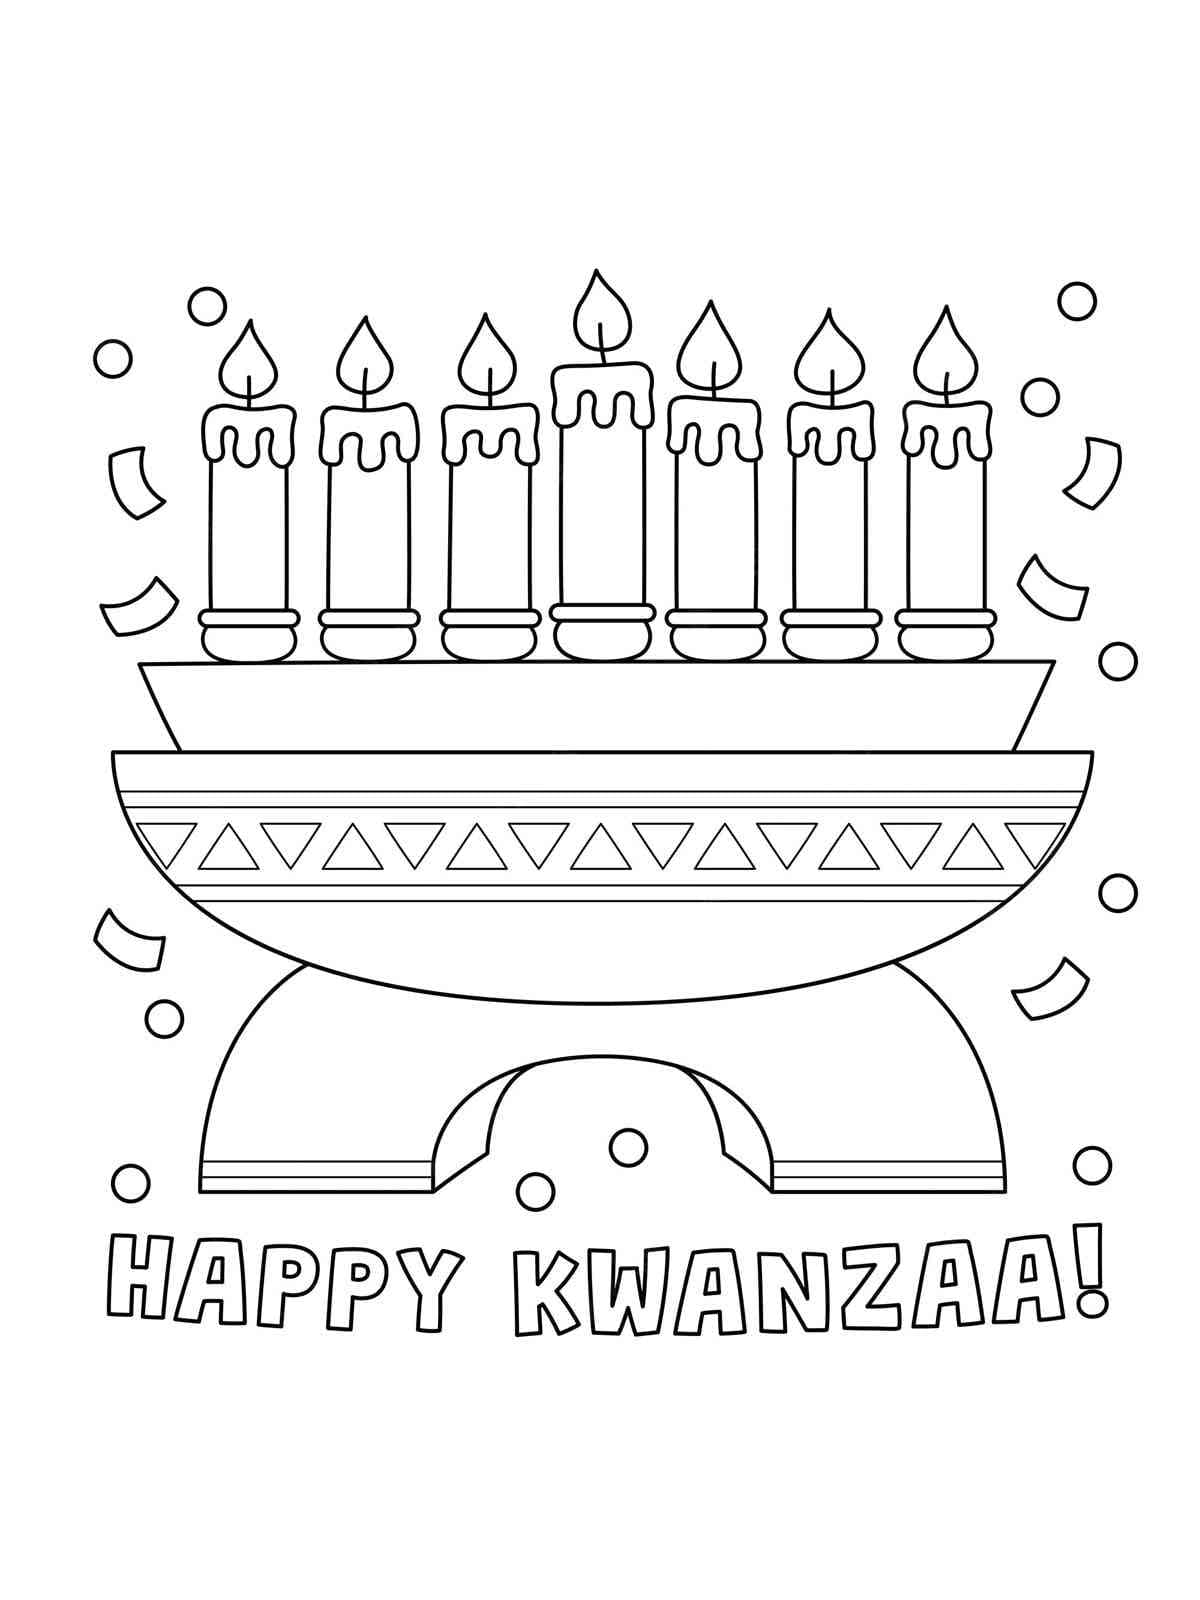 Happy kwanzaa with candles coloring page